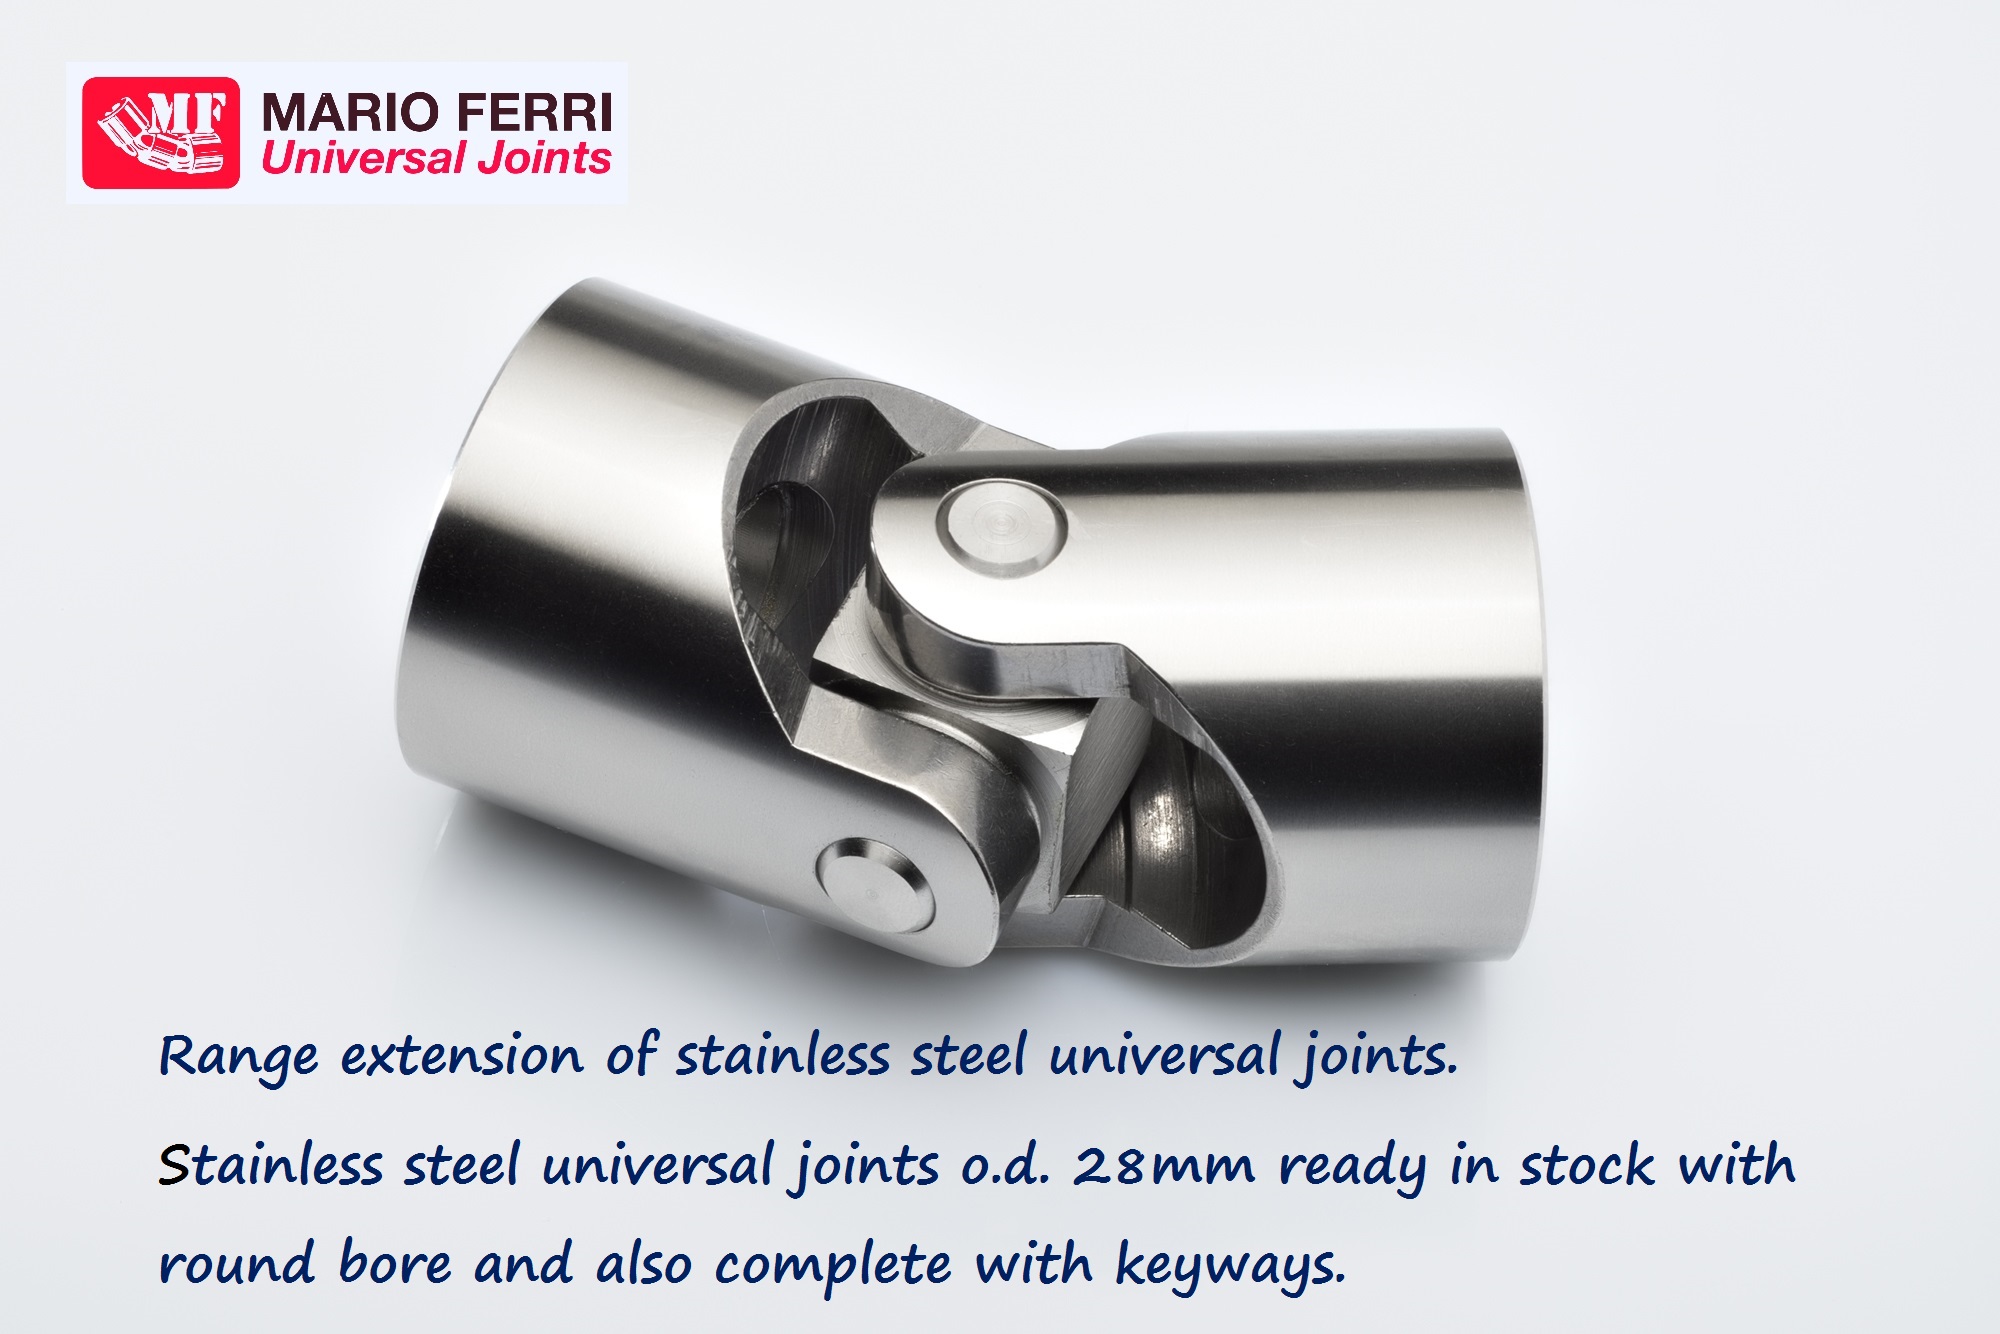 stainless steel universal joints o.d. 28mm ready in stock with round bore and also complete with keyways